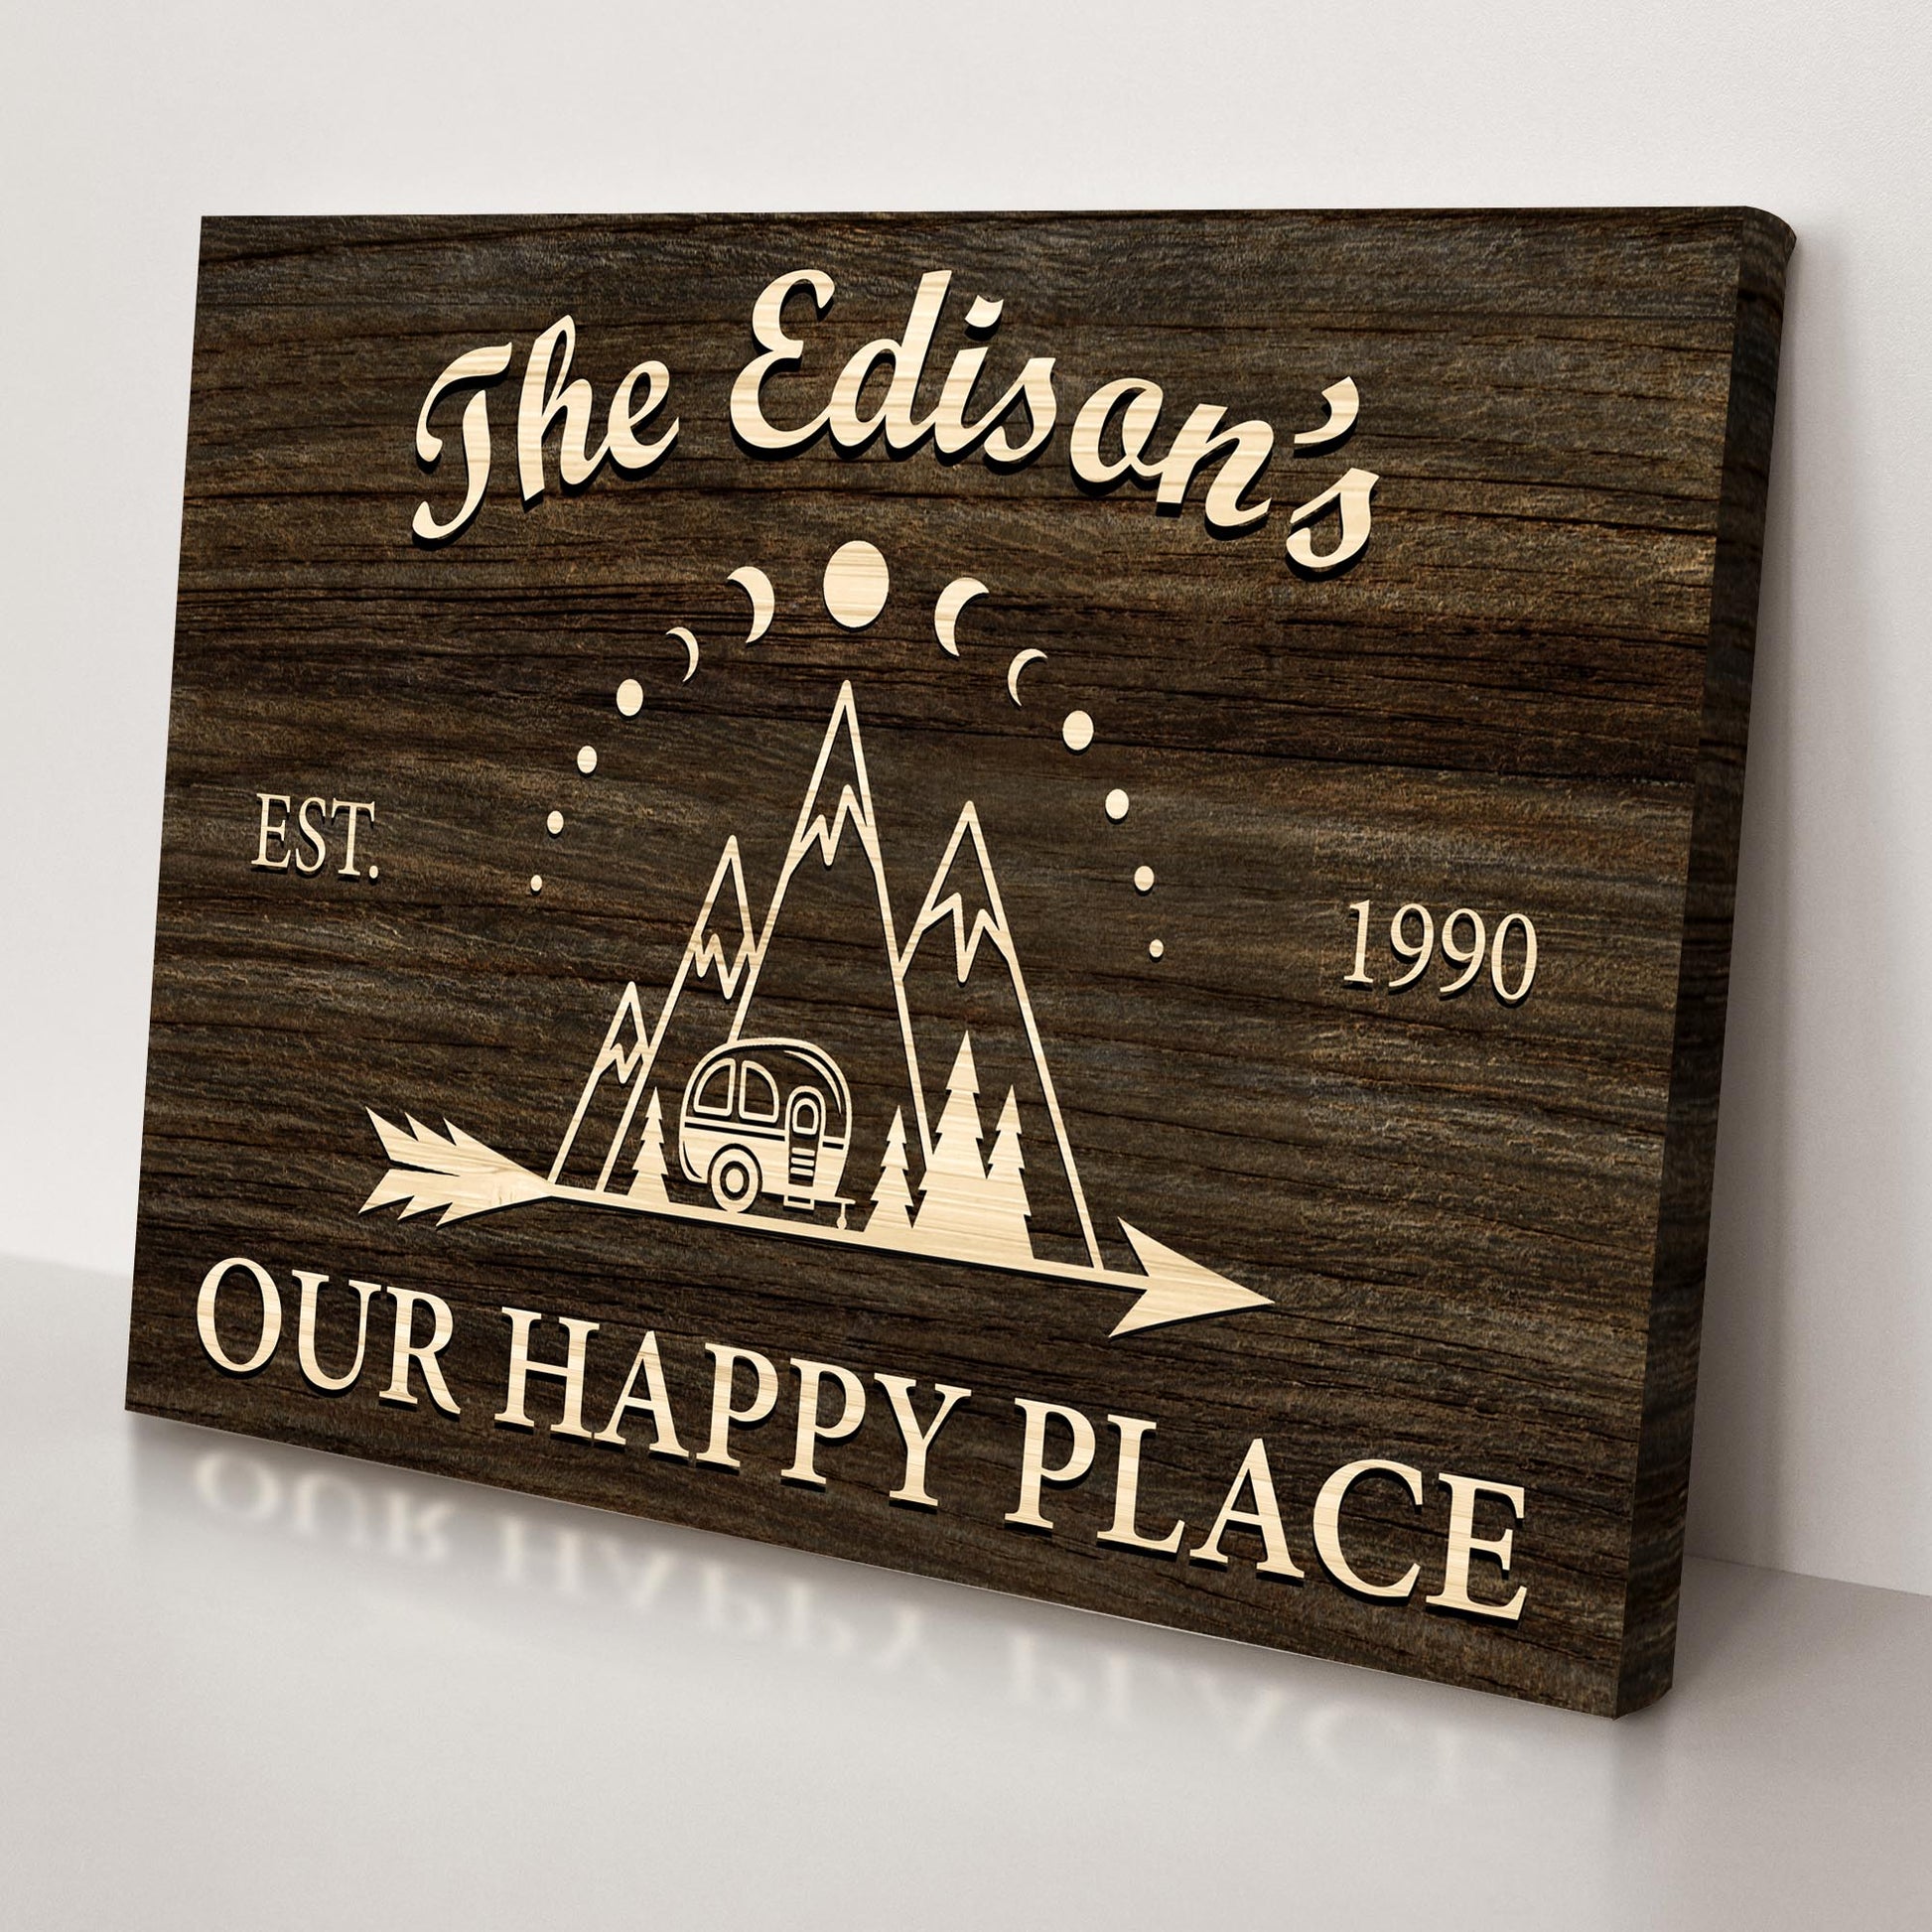 Our Happy Place Trailer Sign - Image by Tailored Canvases